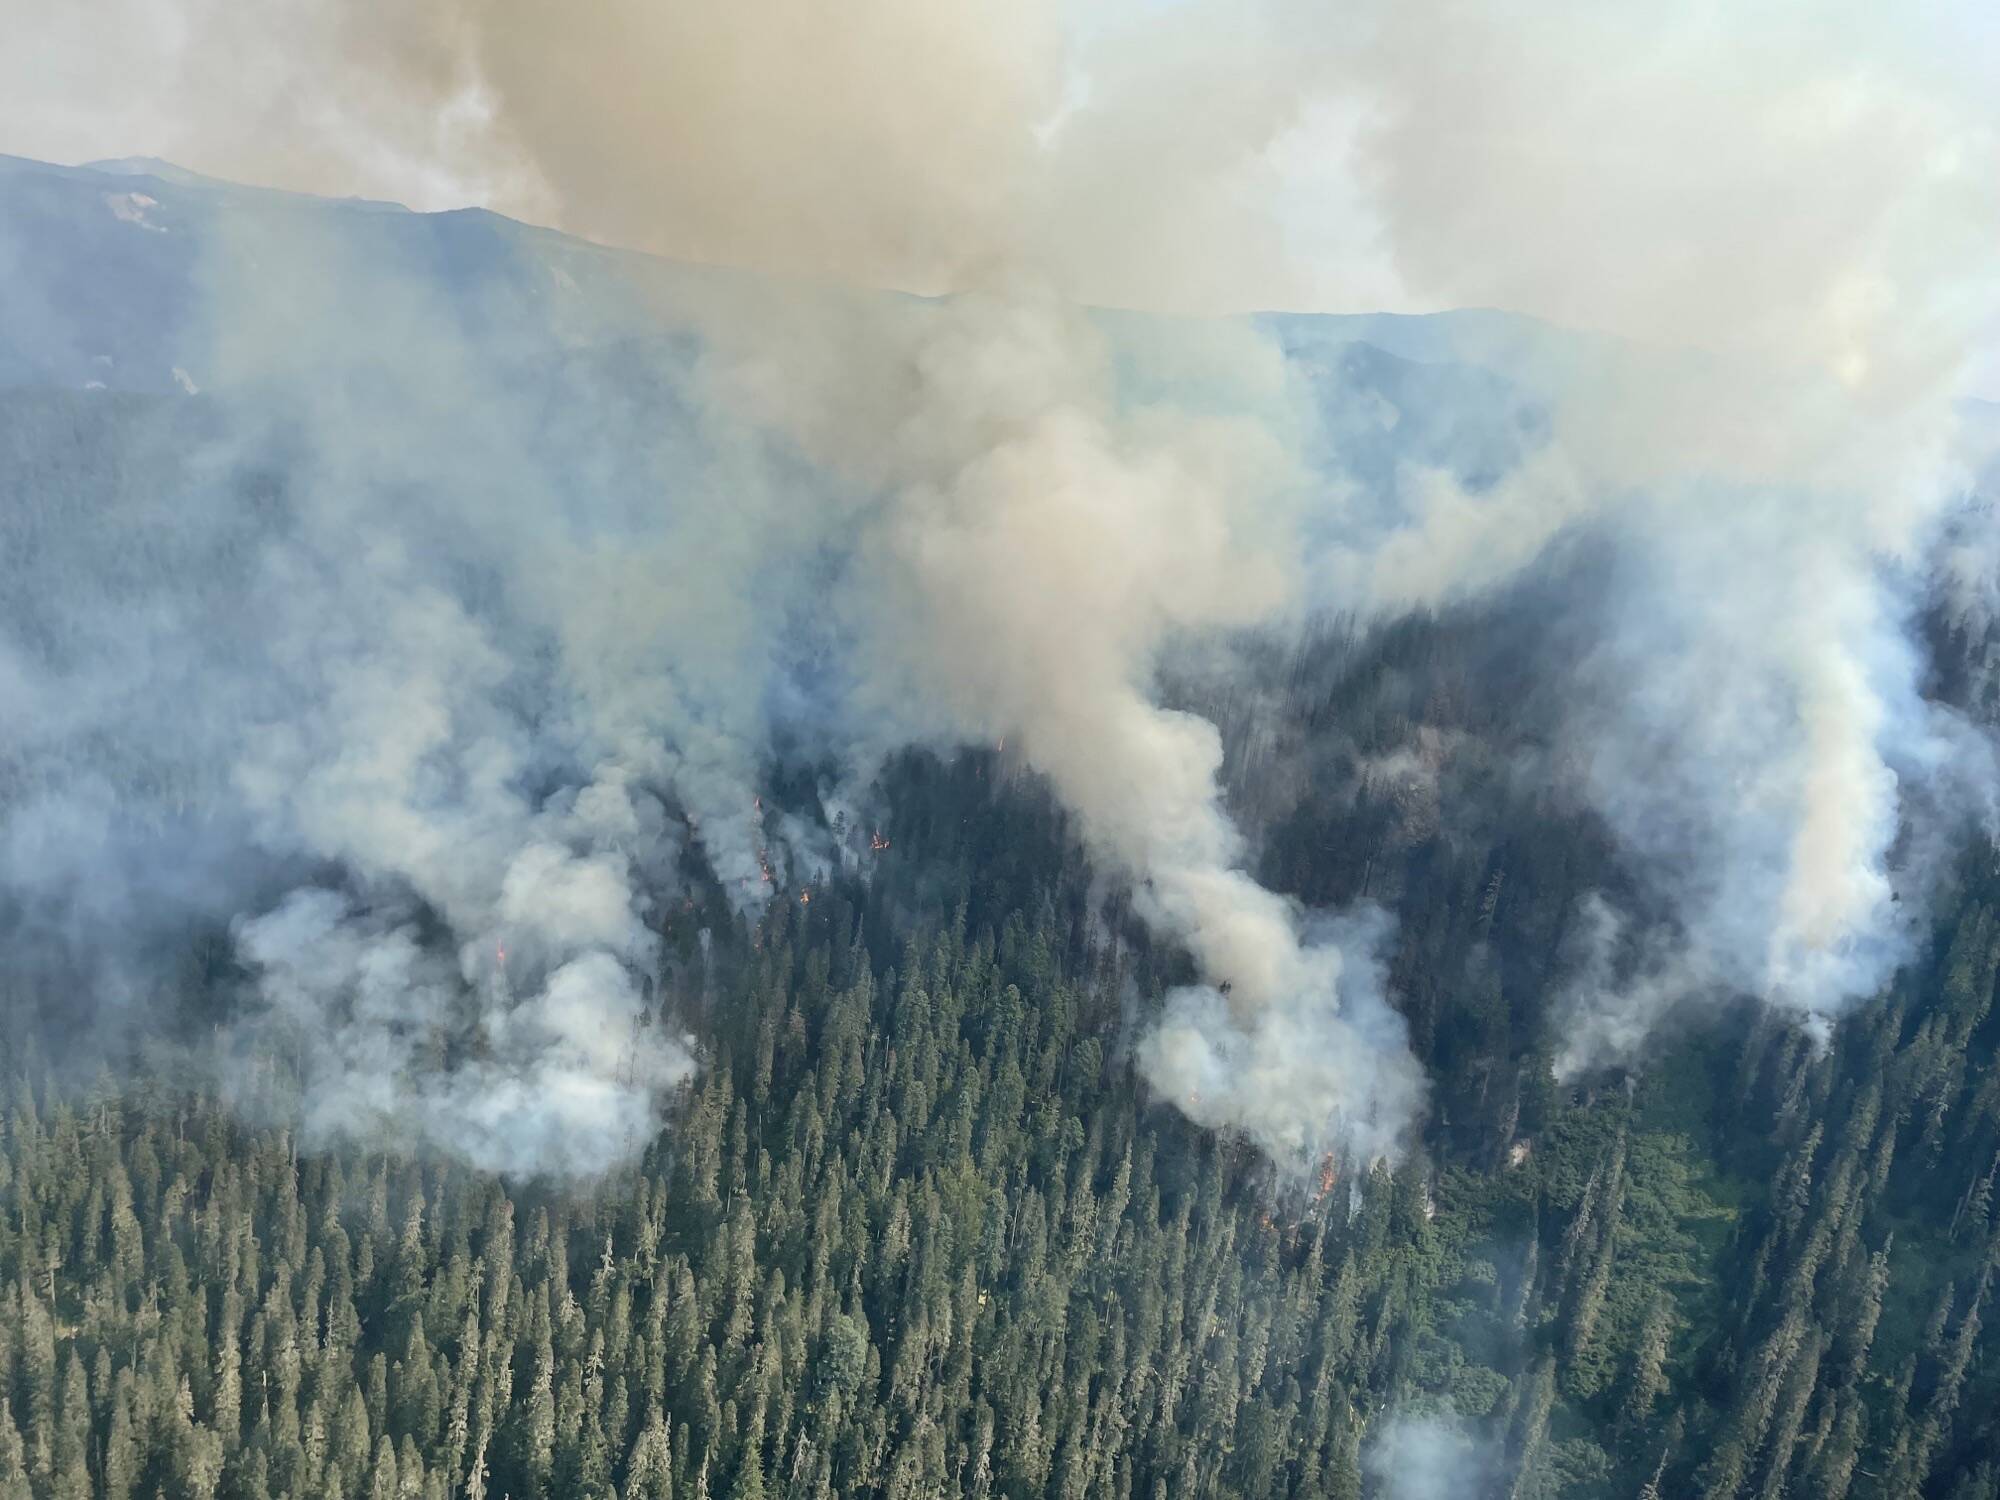 This image of the Goat Rocks Fire was shared by the U.S. Forest Service Monday.